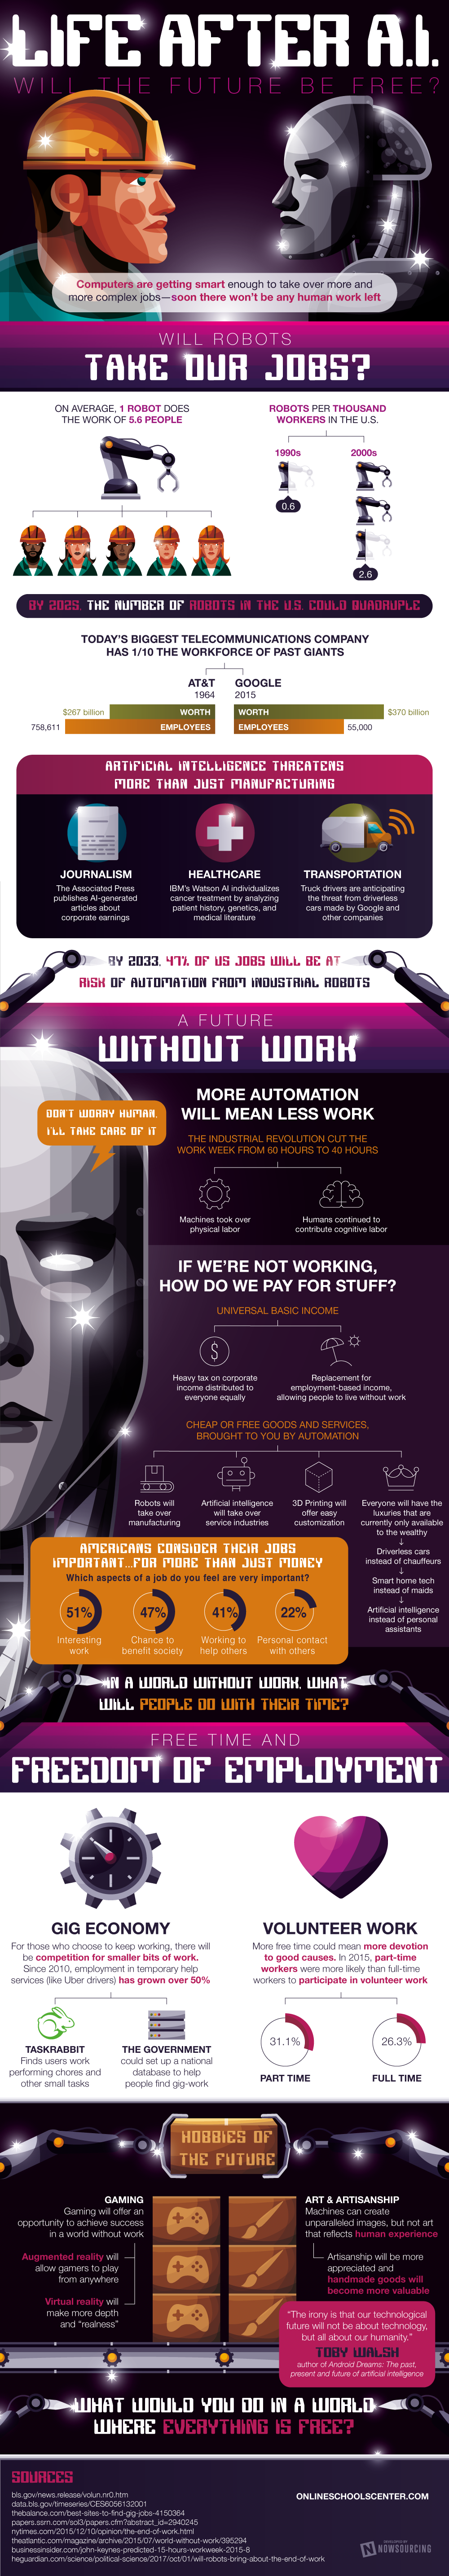 What Will Life Look Like After The AI Revolution? - #infographic